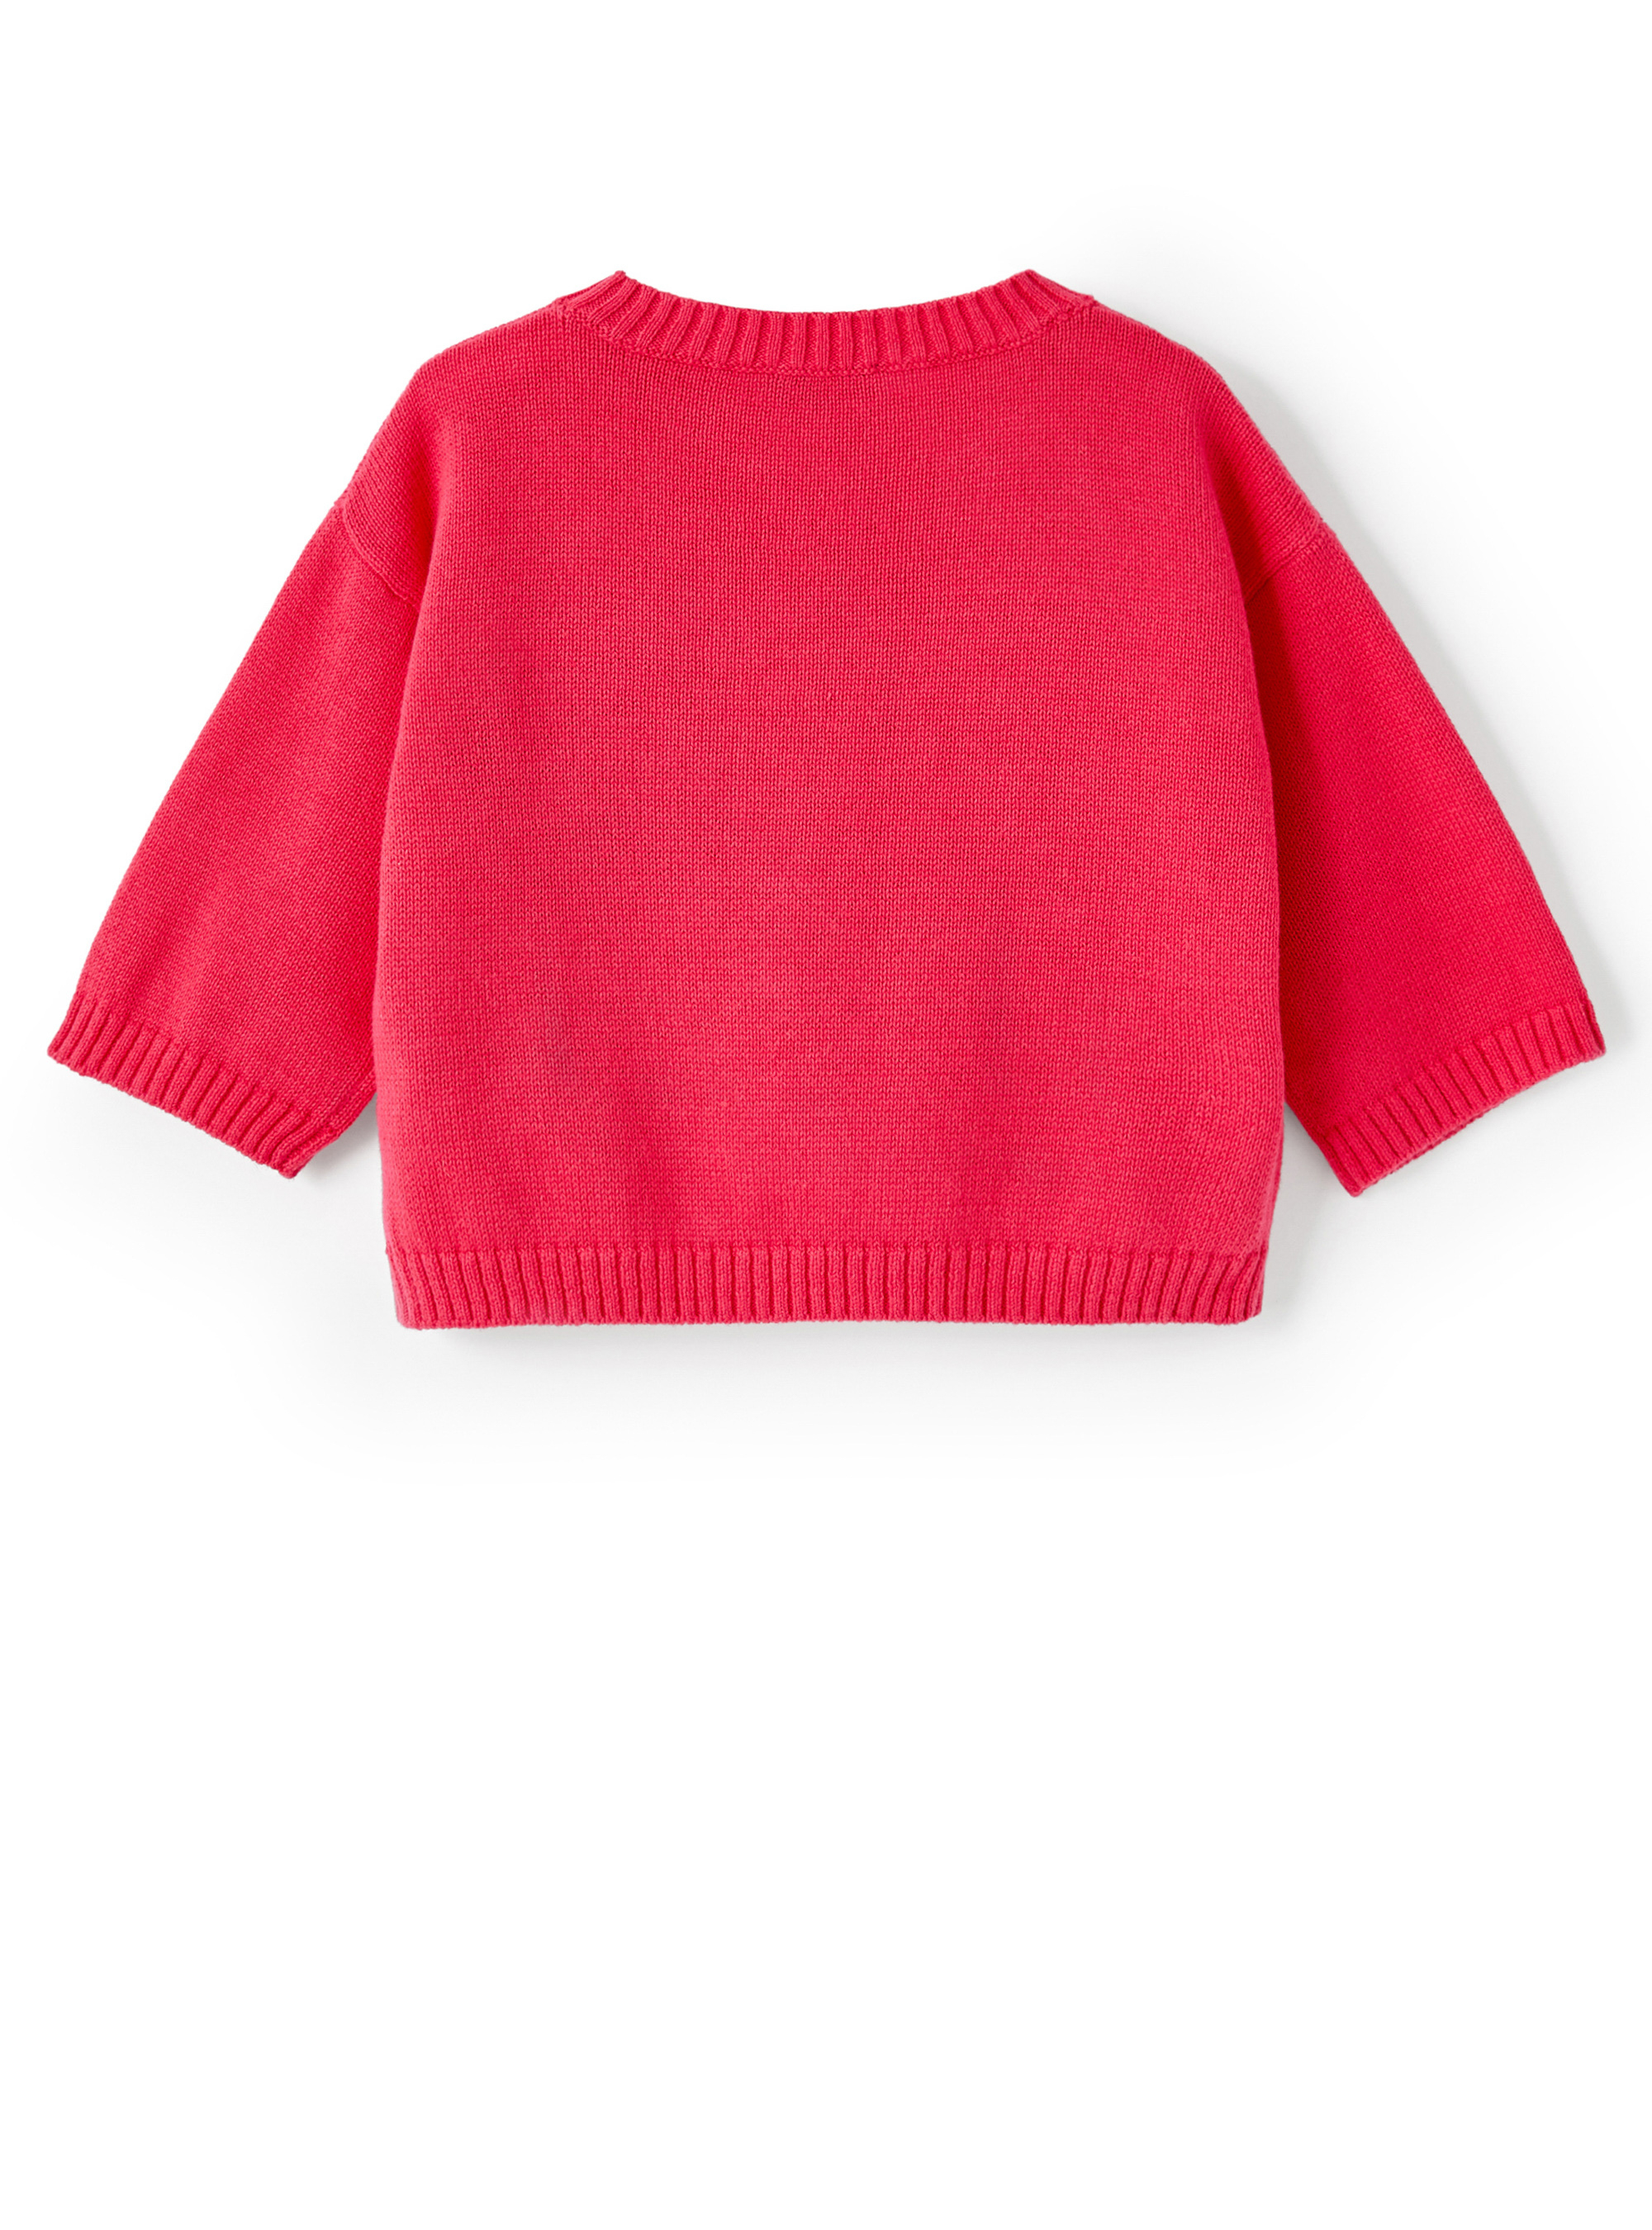 Red sweater with floral pattern - Fuchsia | Il Gufo